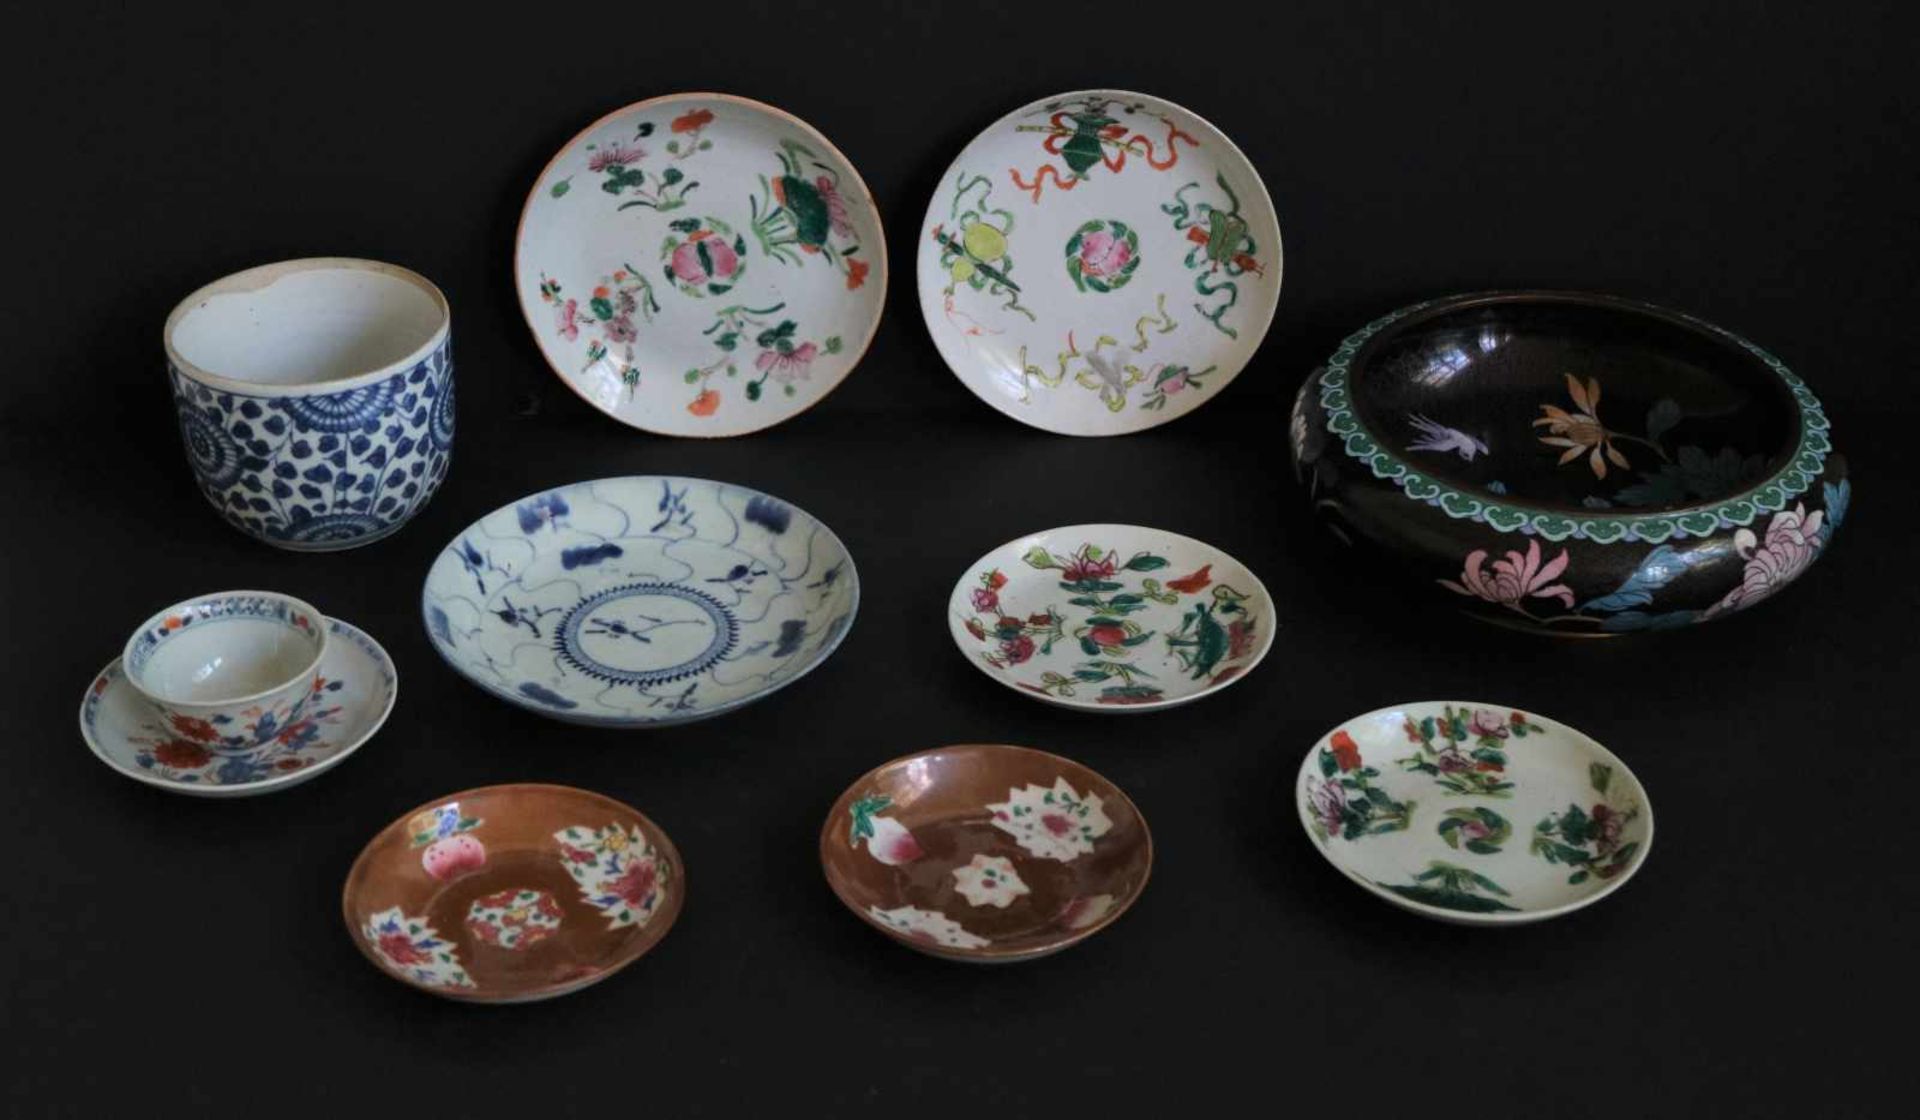 Lot of Chinese porcelain and cloisonné